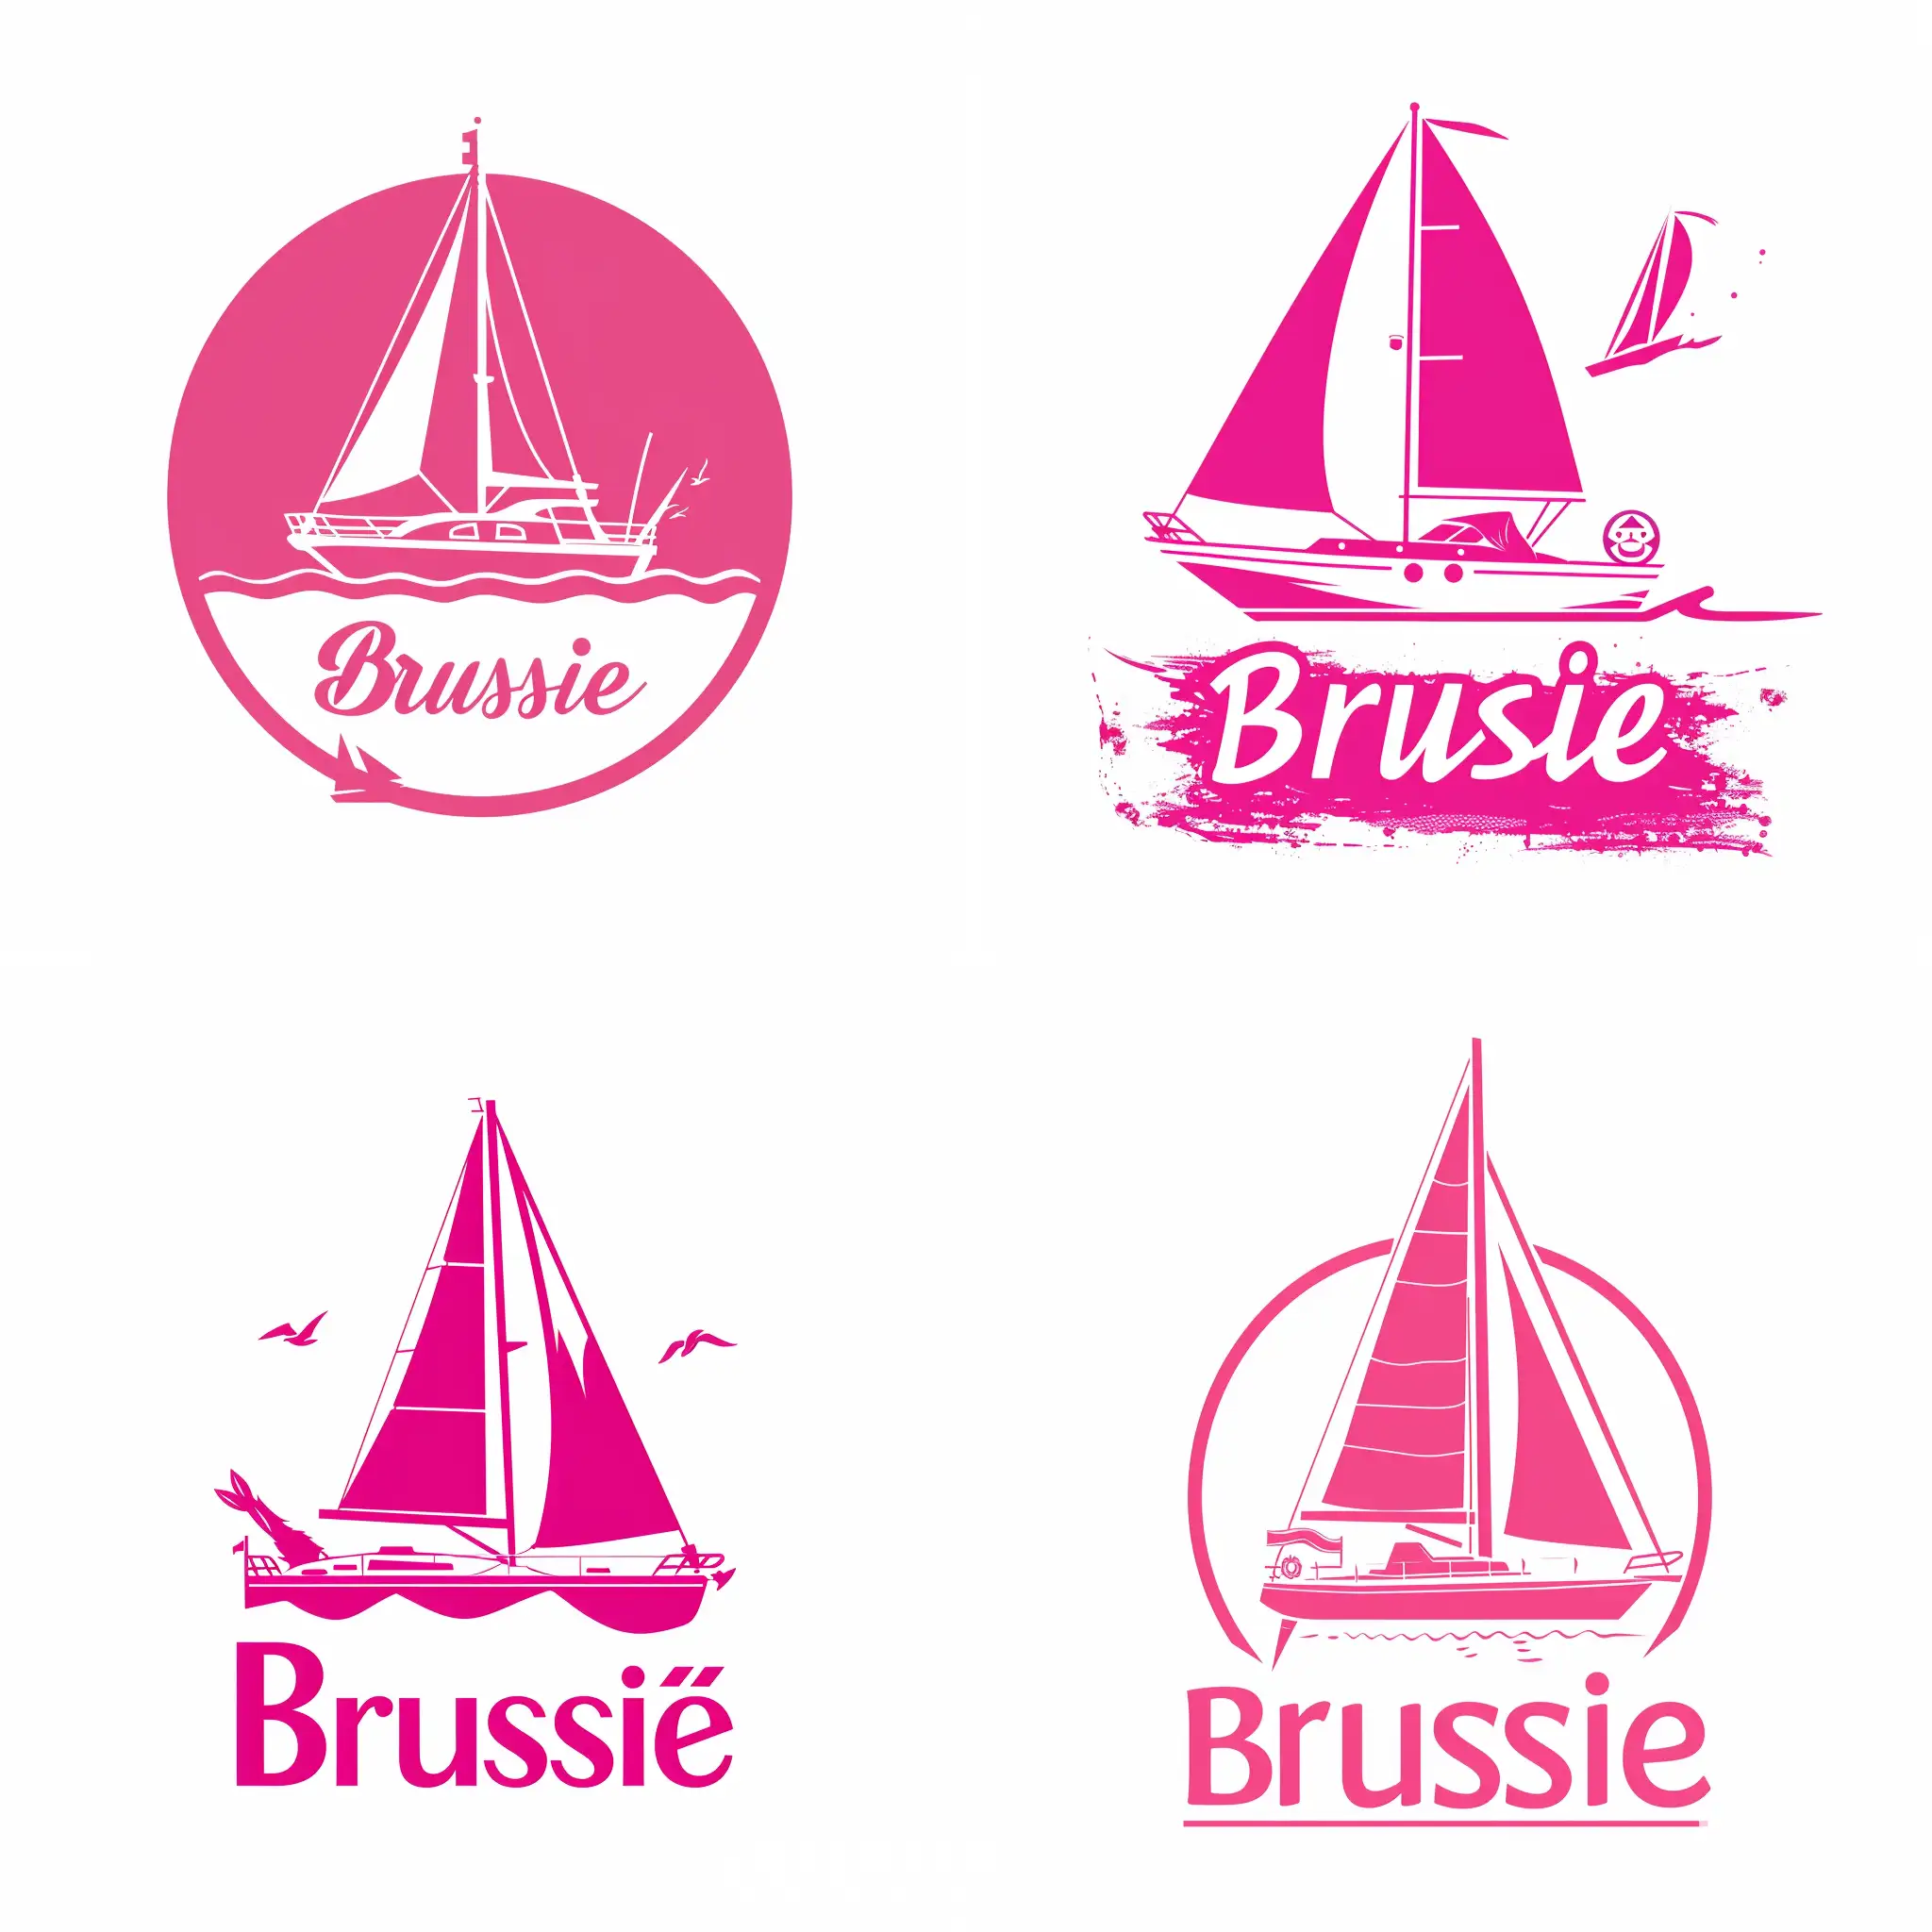 Modern-Pink-Brussie-Group-Logo-with-Sailing-Yacht-on-White-Background